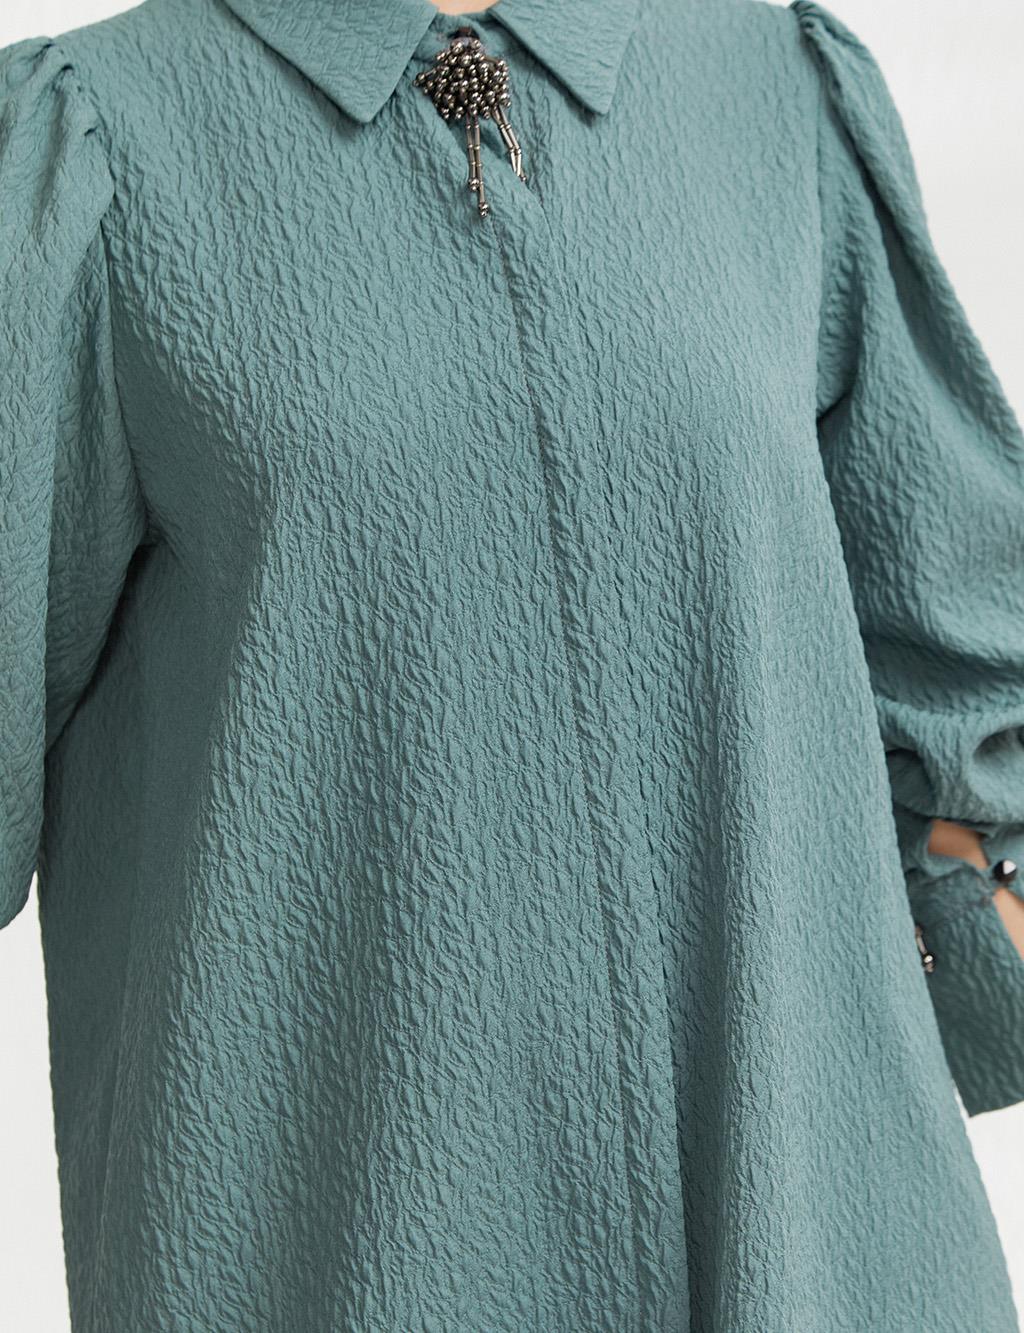 Floral Textured Bead Embroidered Tunic Teal